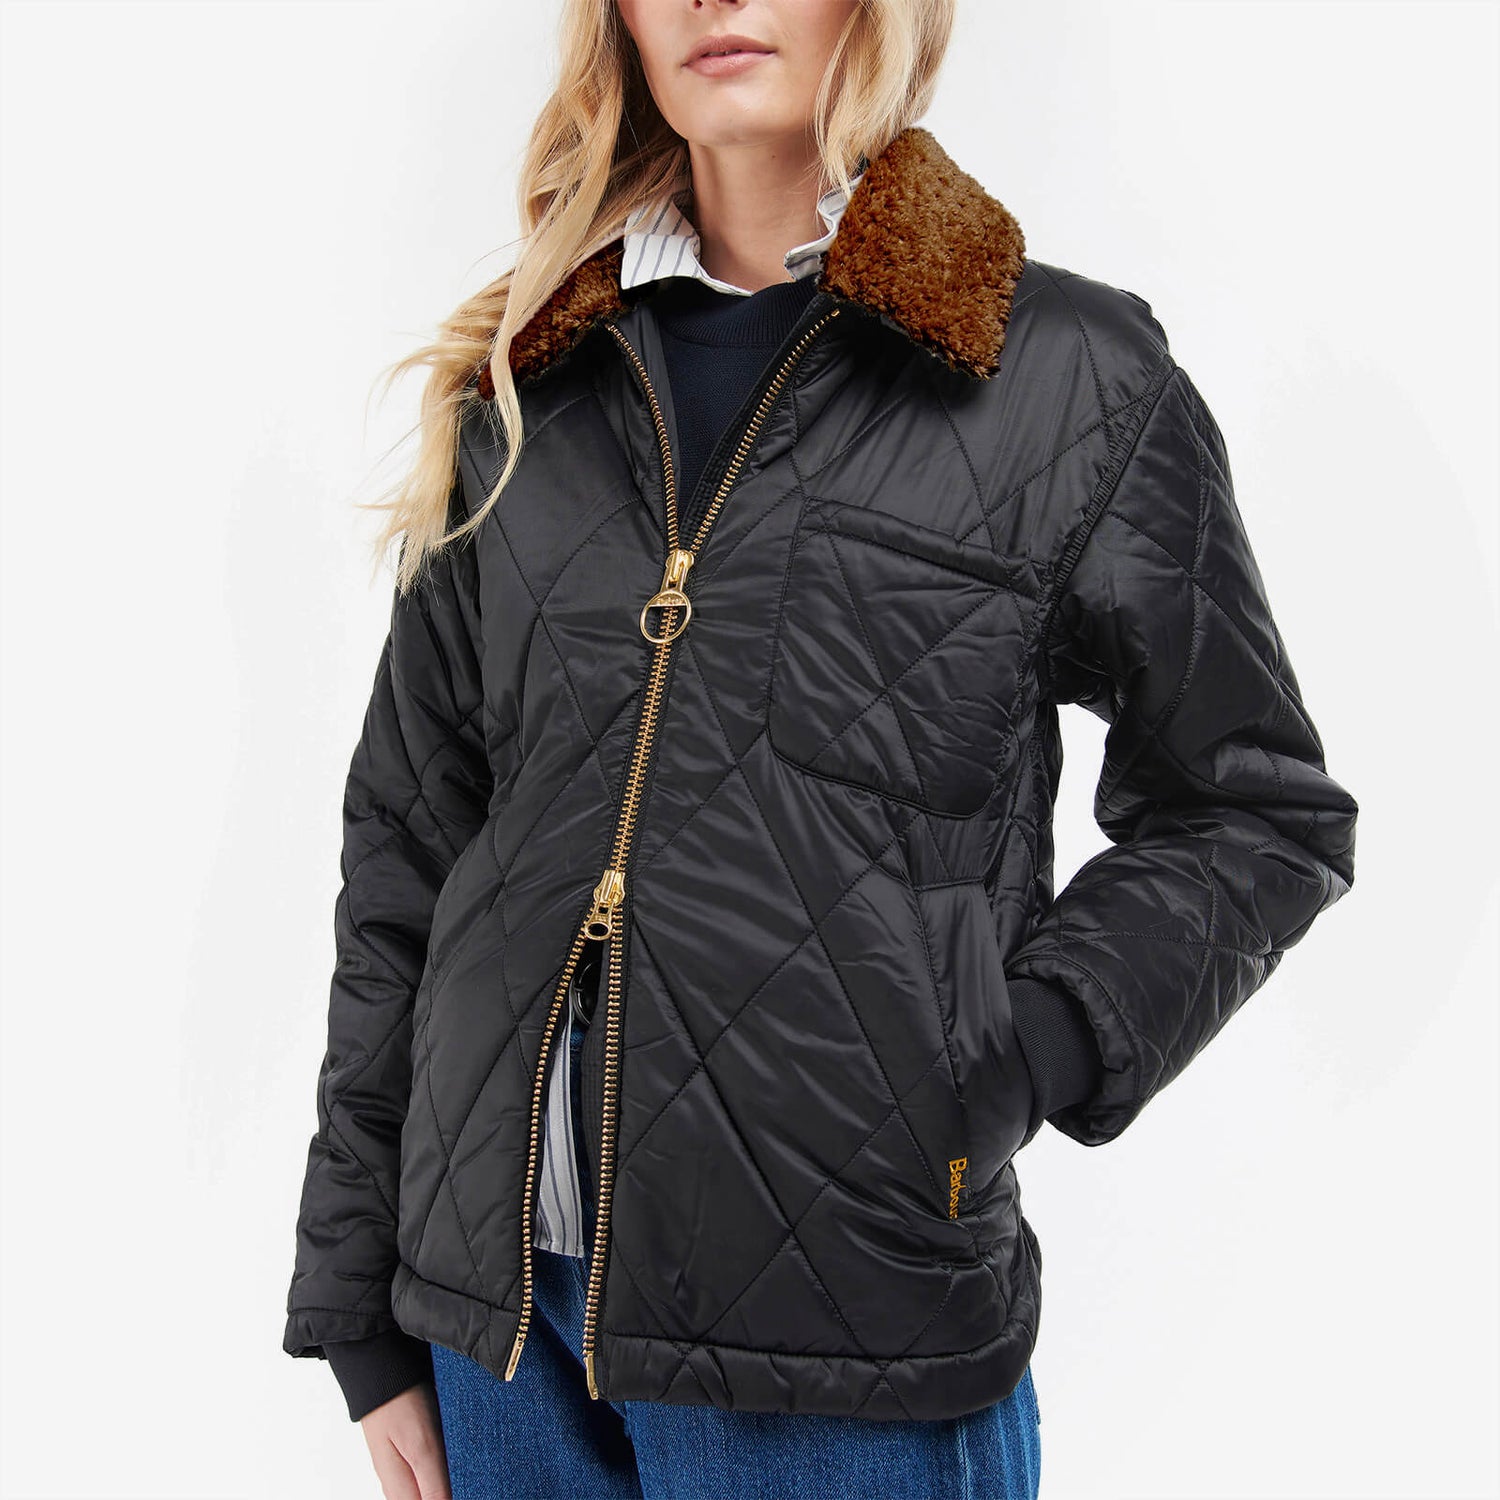 Barbour Vaila Quilted Satin Jacket - UK 16